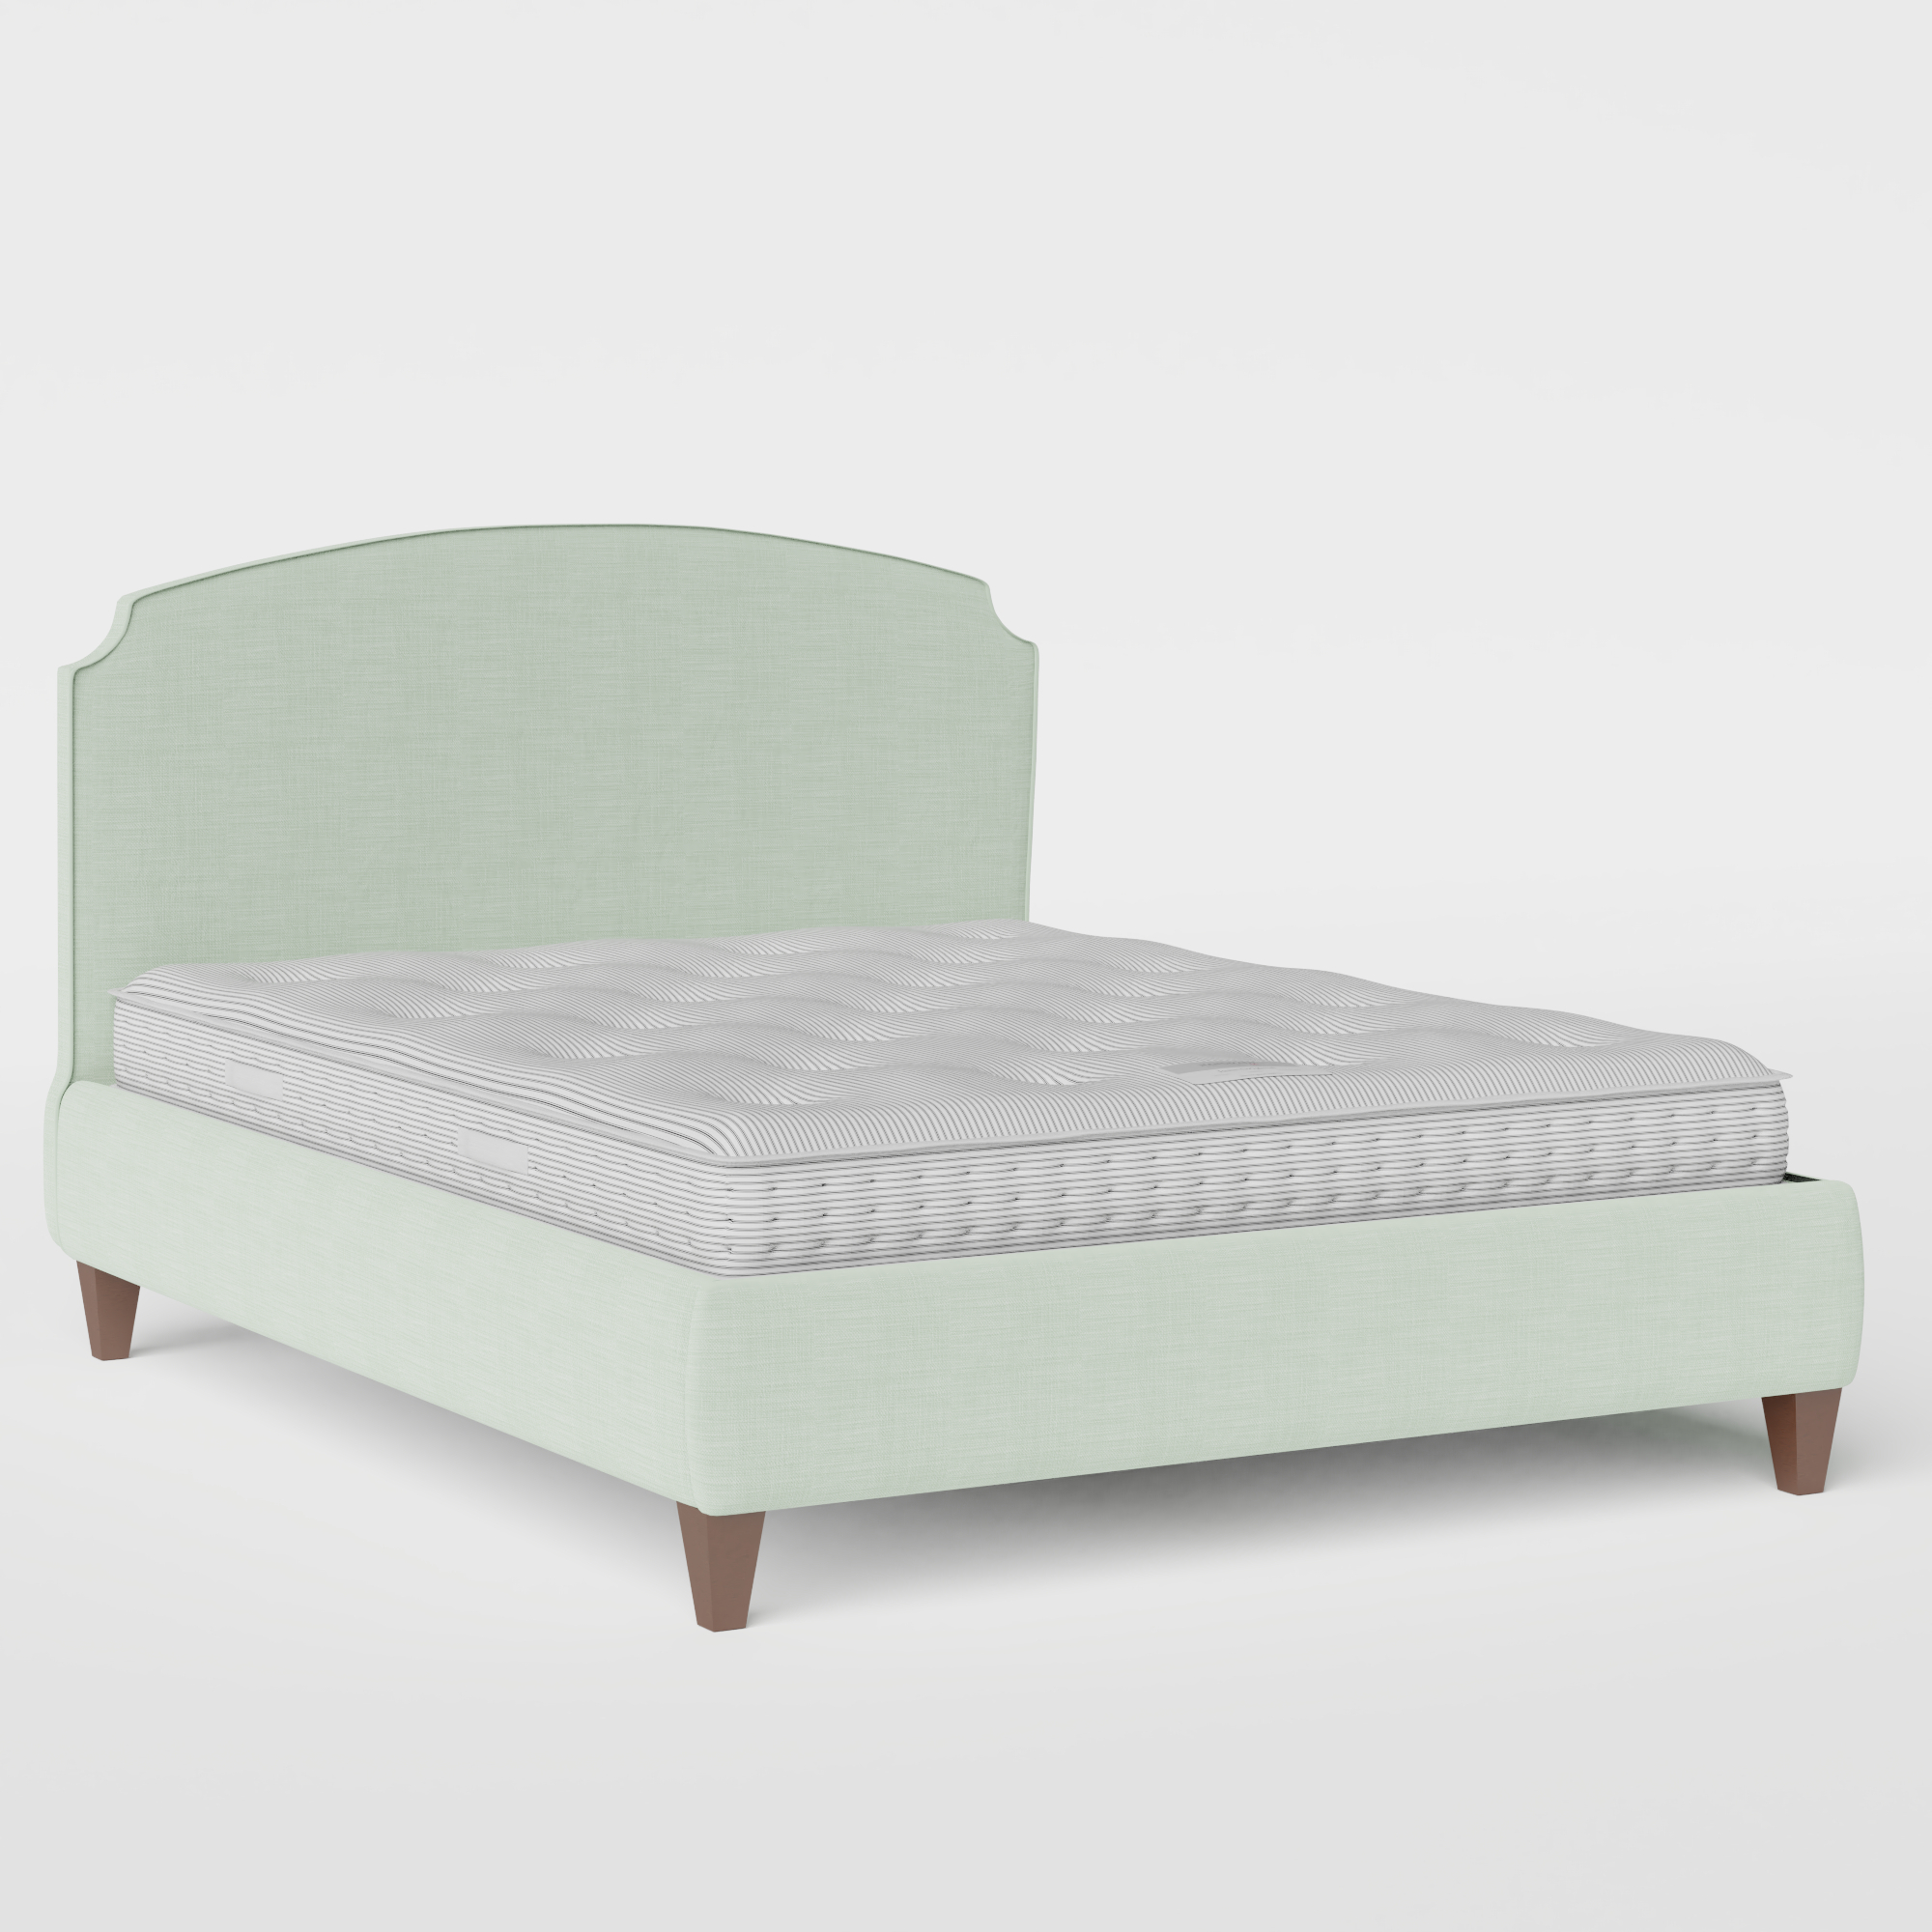 Lide with Piping stoffen bed in duckegg